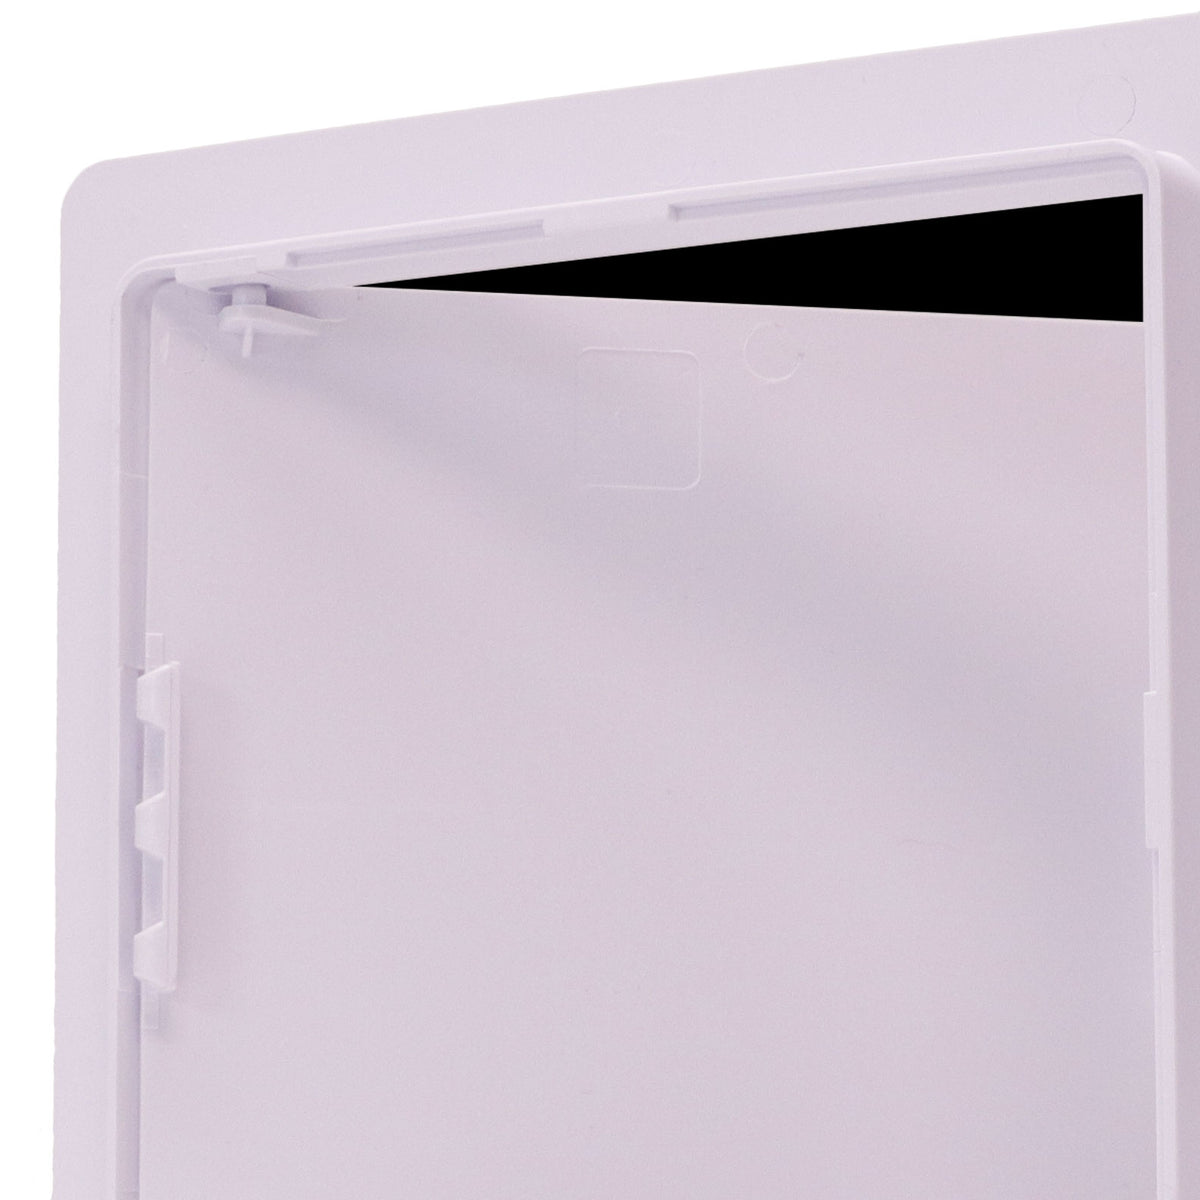 22&quot; X 22&quot; Plastic Access Panel Removeable/Reversable Door With Frame For Concealed Wall / Ceiling Application - [Outer Dimensions: 24&quot; Width X 24&quot; Height]